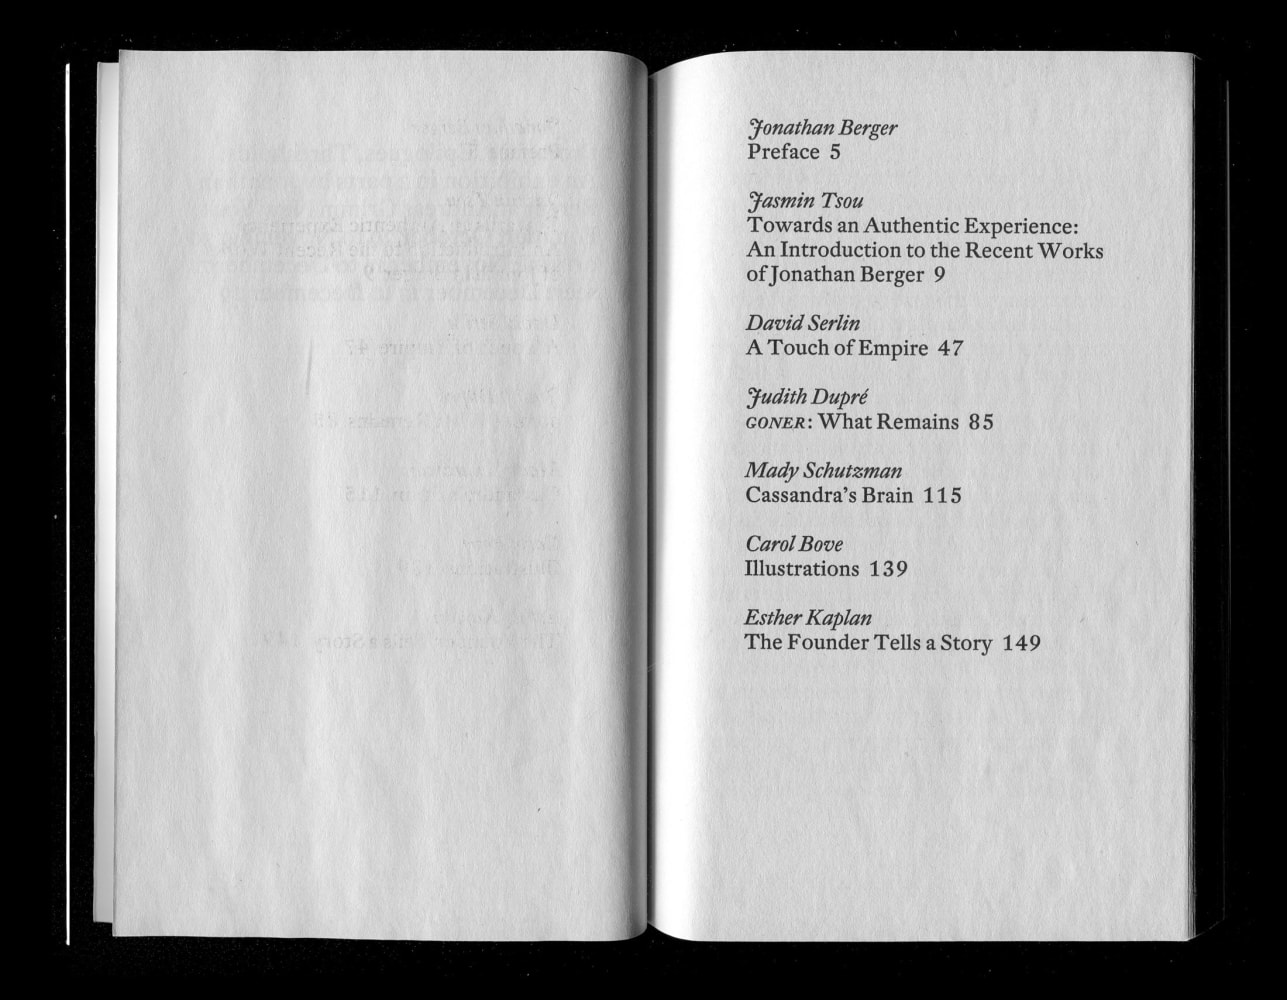 Jonathan Berger
Prologues, Epilogues, Thresholds: An Exhiibtion in Three Parts, 2007
With contributions by Carol Bove, Judith Dupr&amp;eacute;, Esther Kaplan, Mady Schutzman, David Serlin, and Jasmin Tsou
Published by Andreas Grimm Gallery
Designed by Julian Bittiner